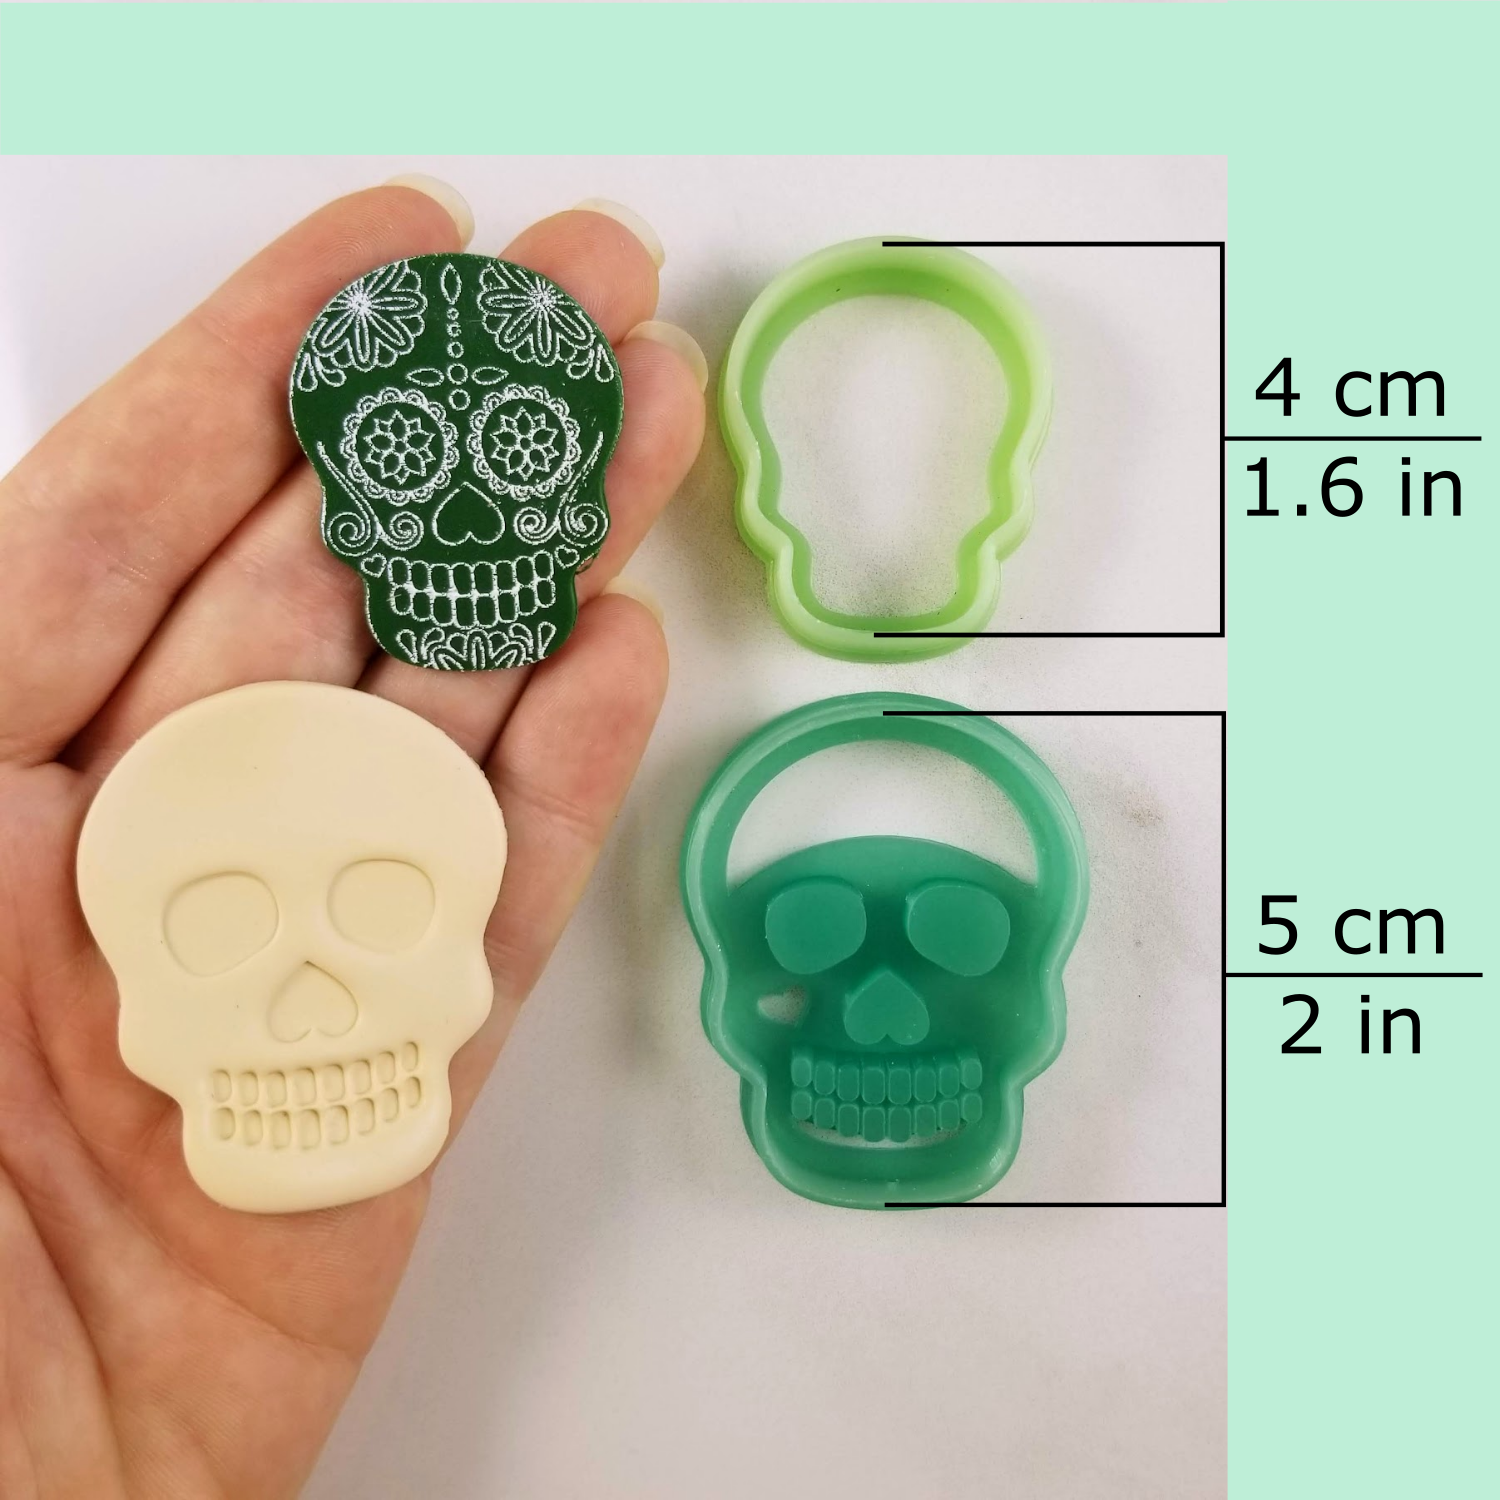 Debossing/embossing and outline skull polymer clay cutters dimensions: large, medium, dangle, statement sizes. 